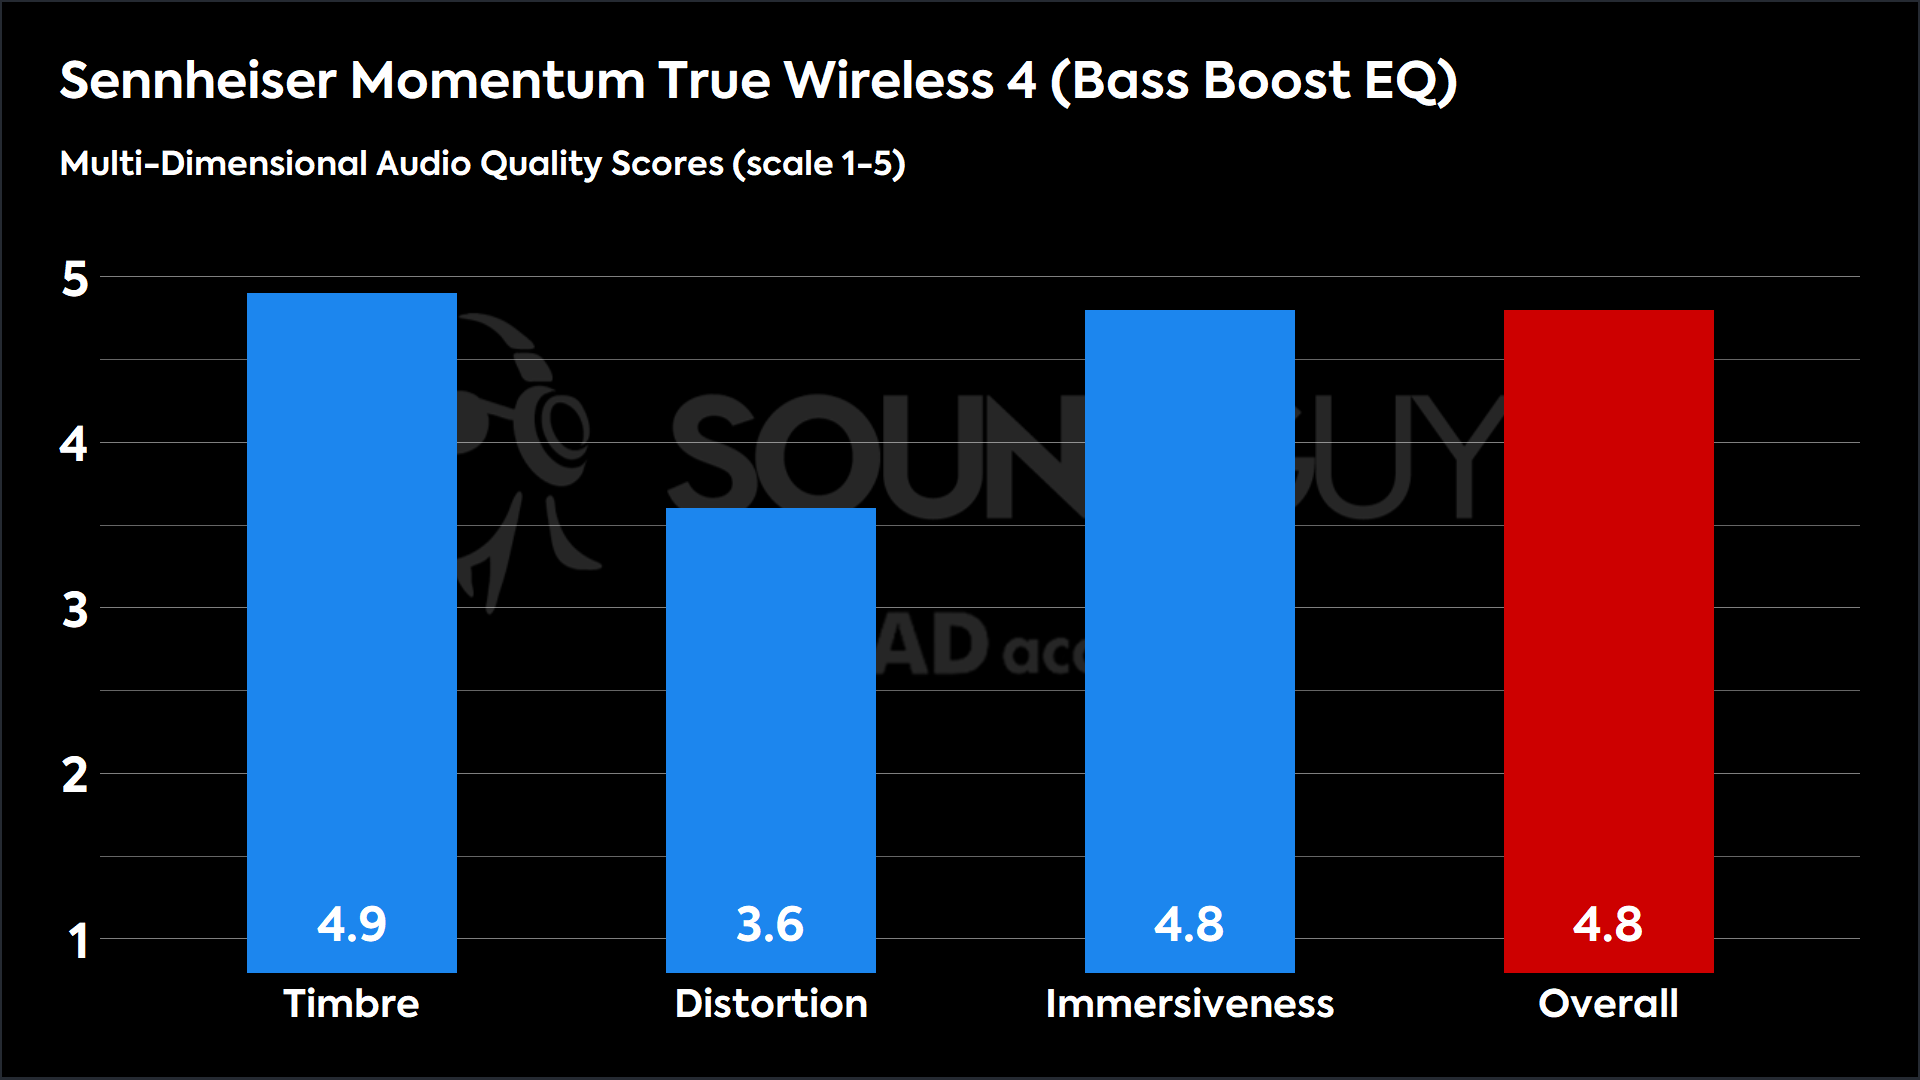 This chart shows the MDAQS results for the Sennheiser Momentum True Wireless 4 in Bass Boost EQ mode. The Timbre score is 4.9, The Distortion score is 3.6, the Immersiveness score is 4.8, and the Overall Score is 4.8).